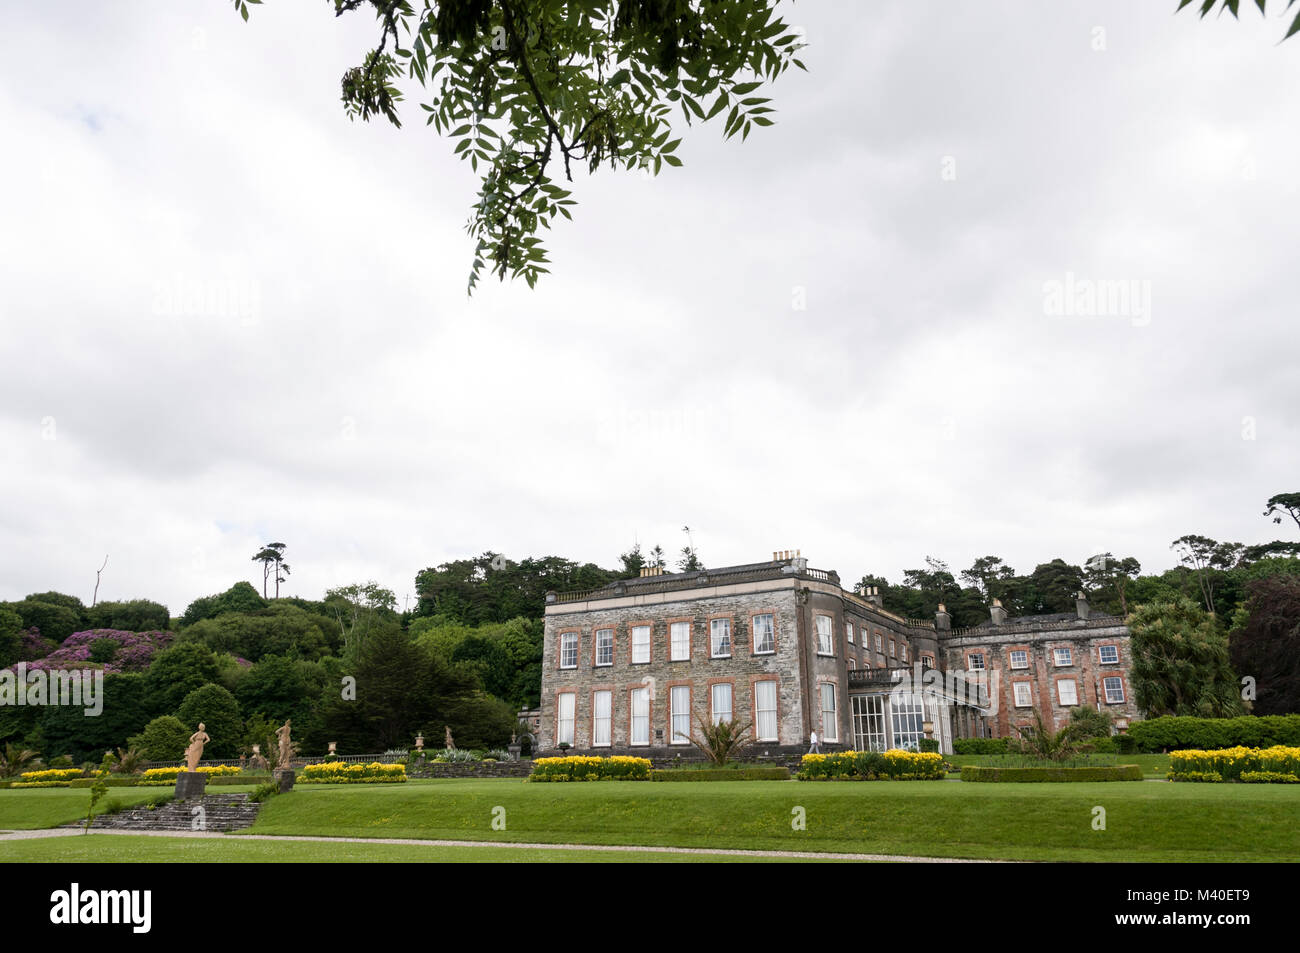 Bantry house, a stately house and gardens in Bantry, Southern Ireland Stock Photo